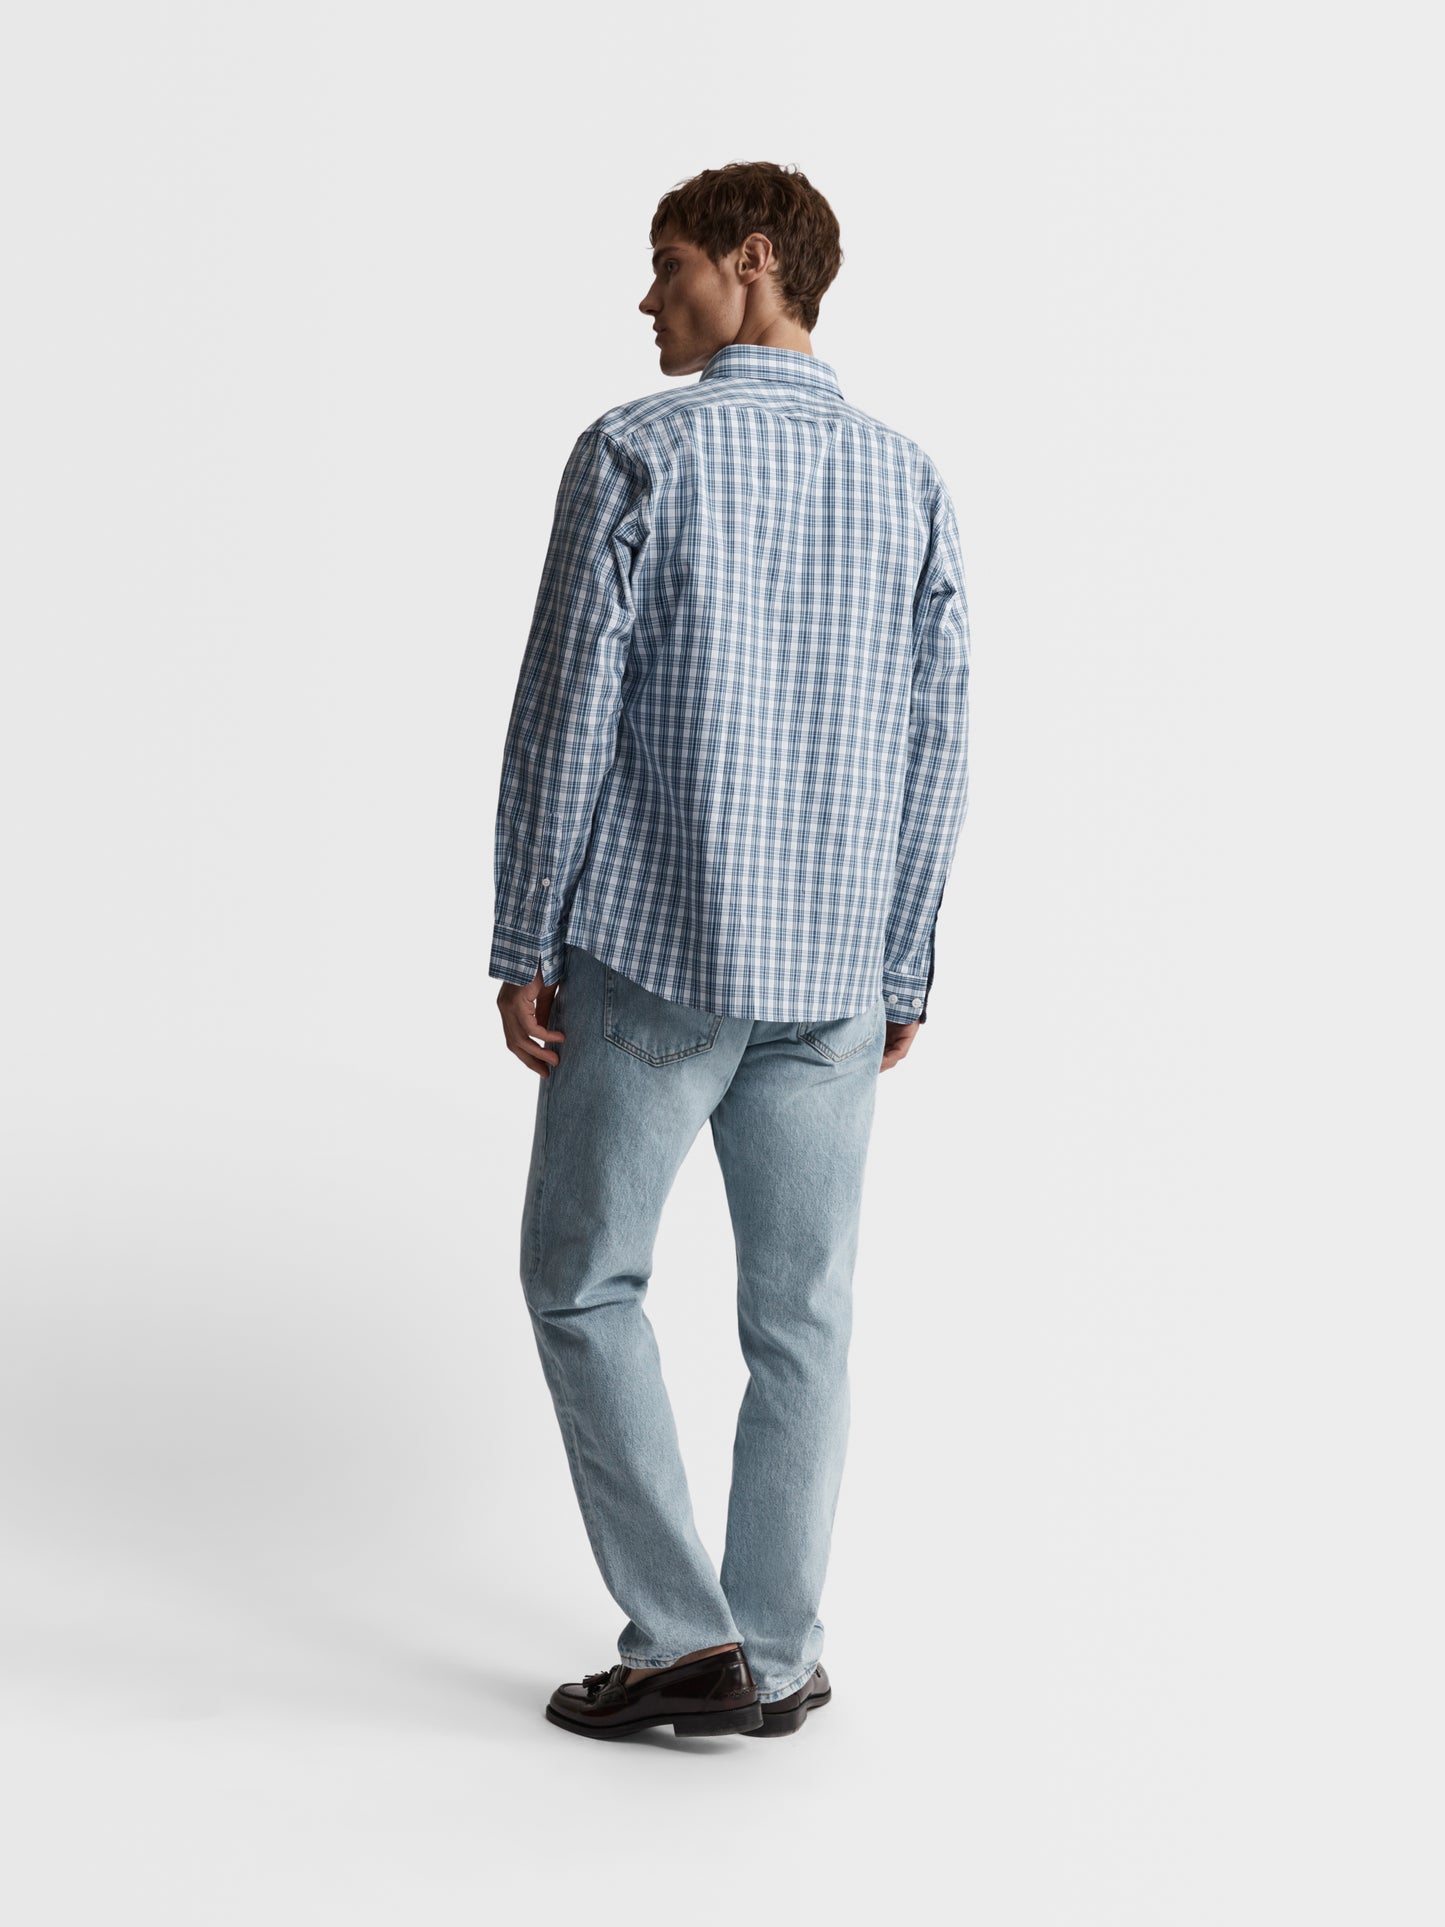 Image 5 of Slim Fit Blue and White Oxford Check Shirt